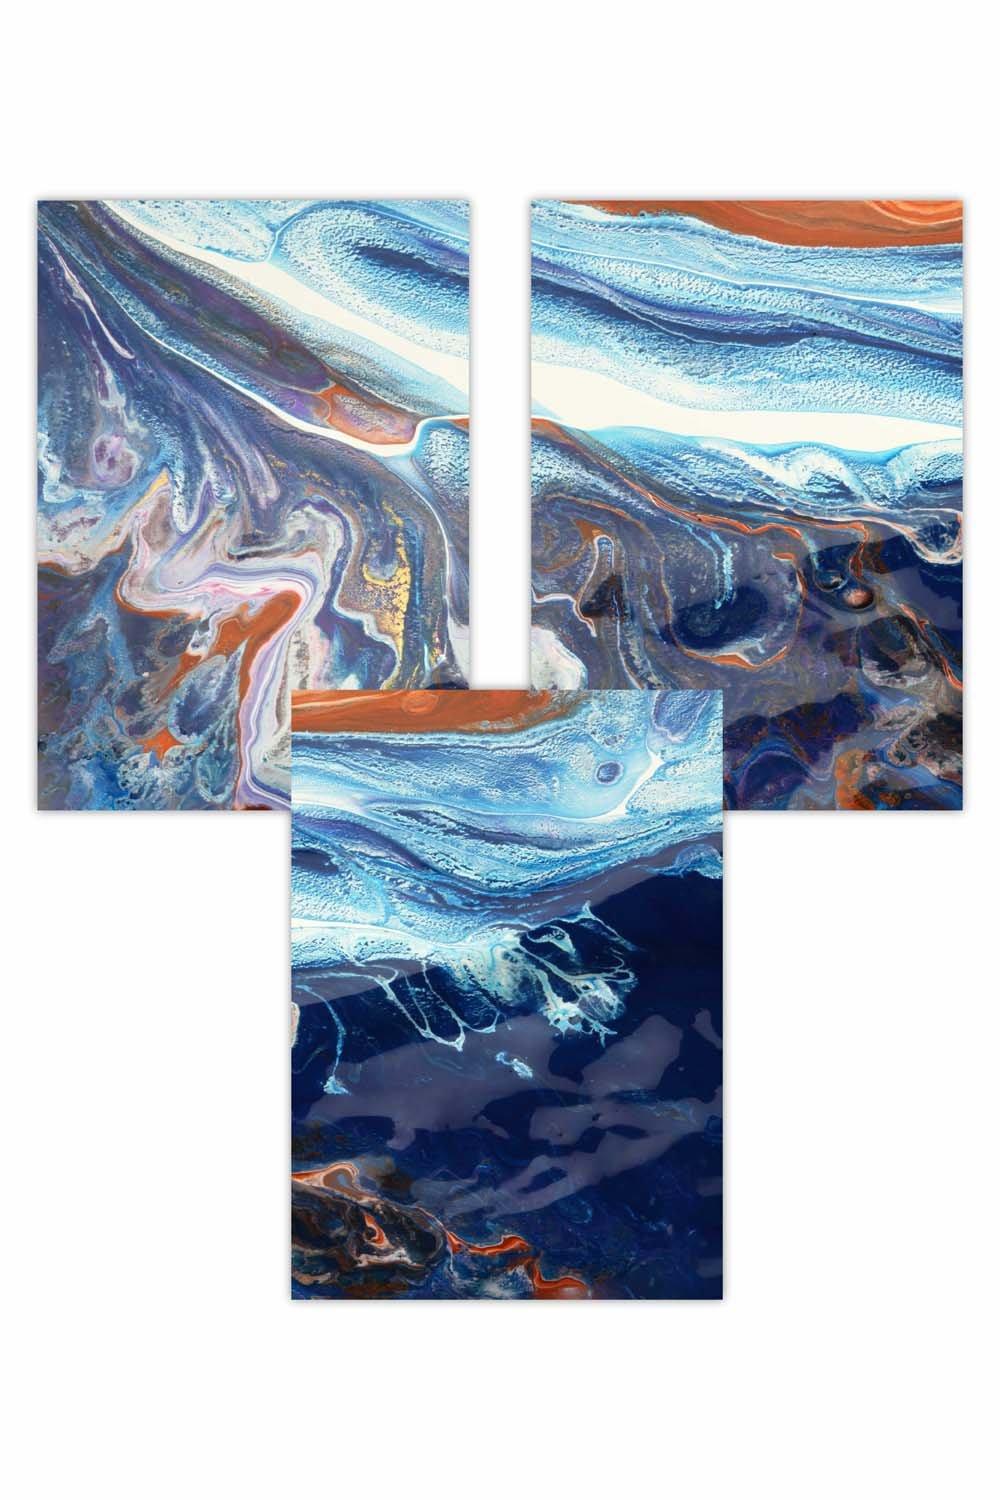 Set of 3 Abstract Blue and Orange Ocean Art Posters